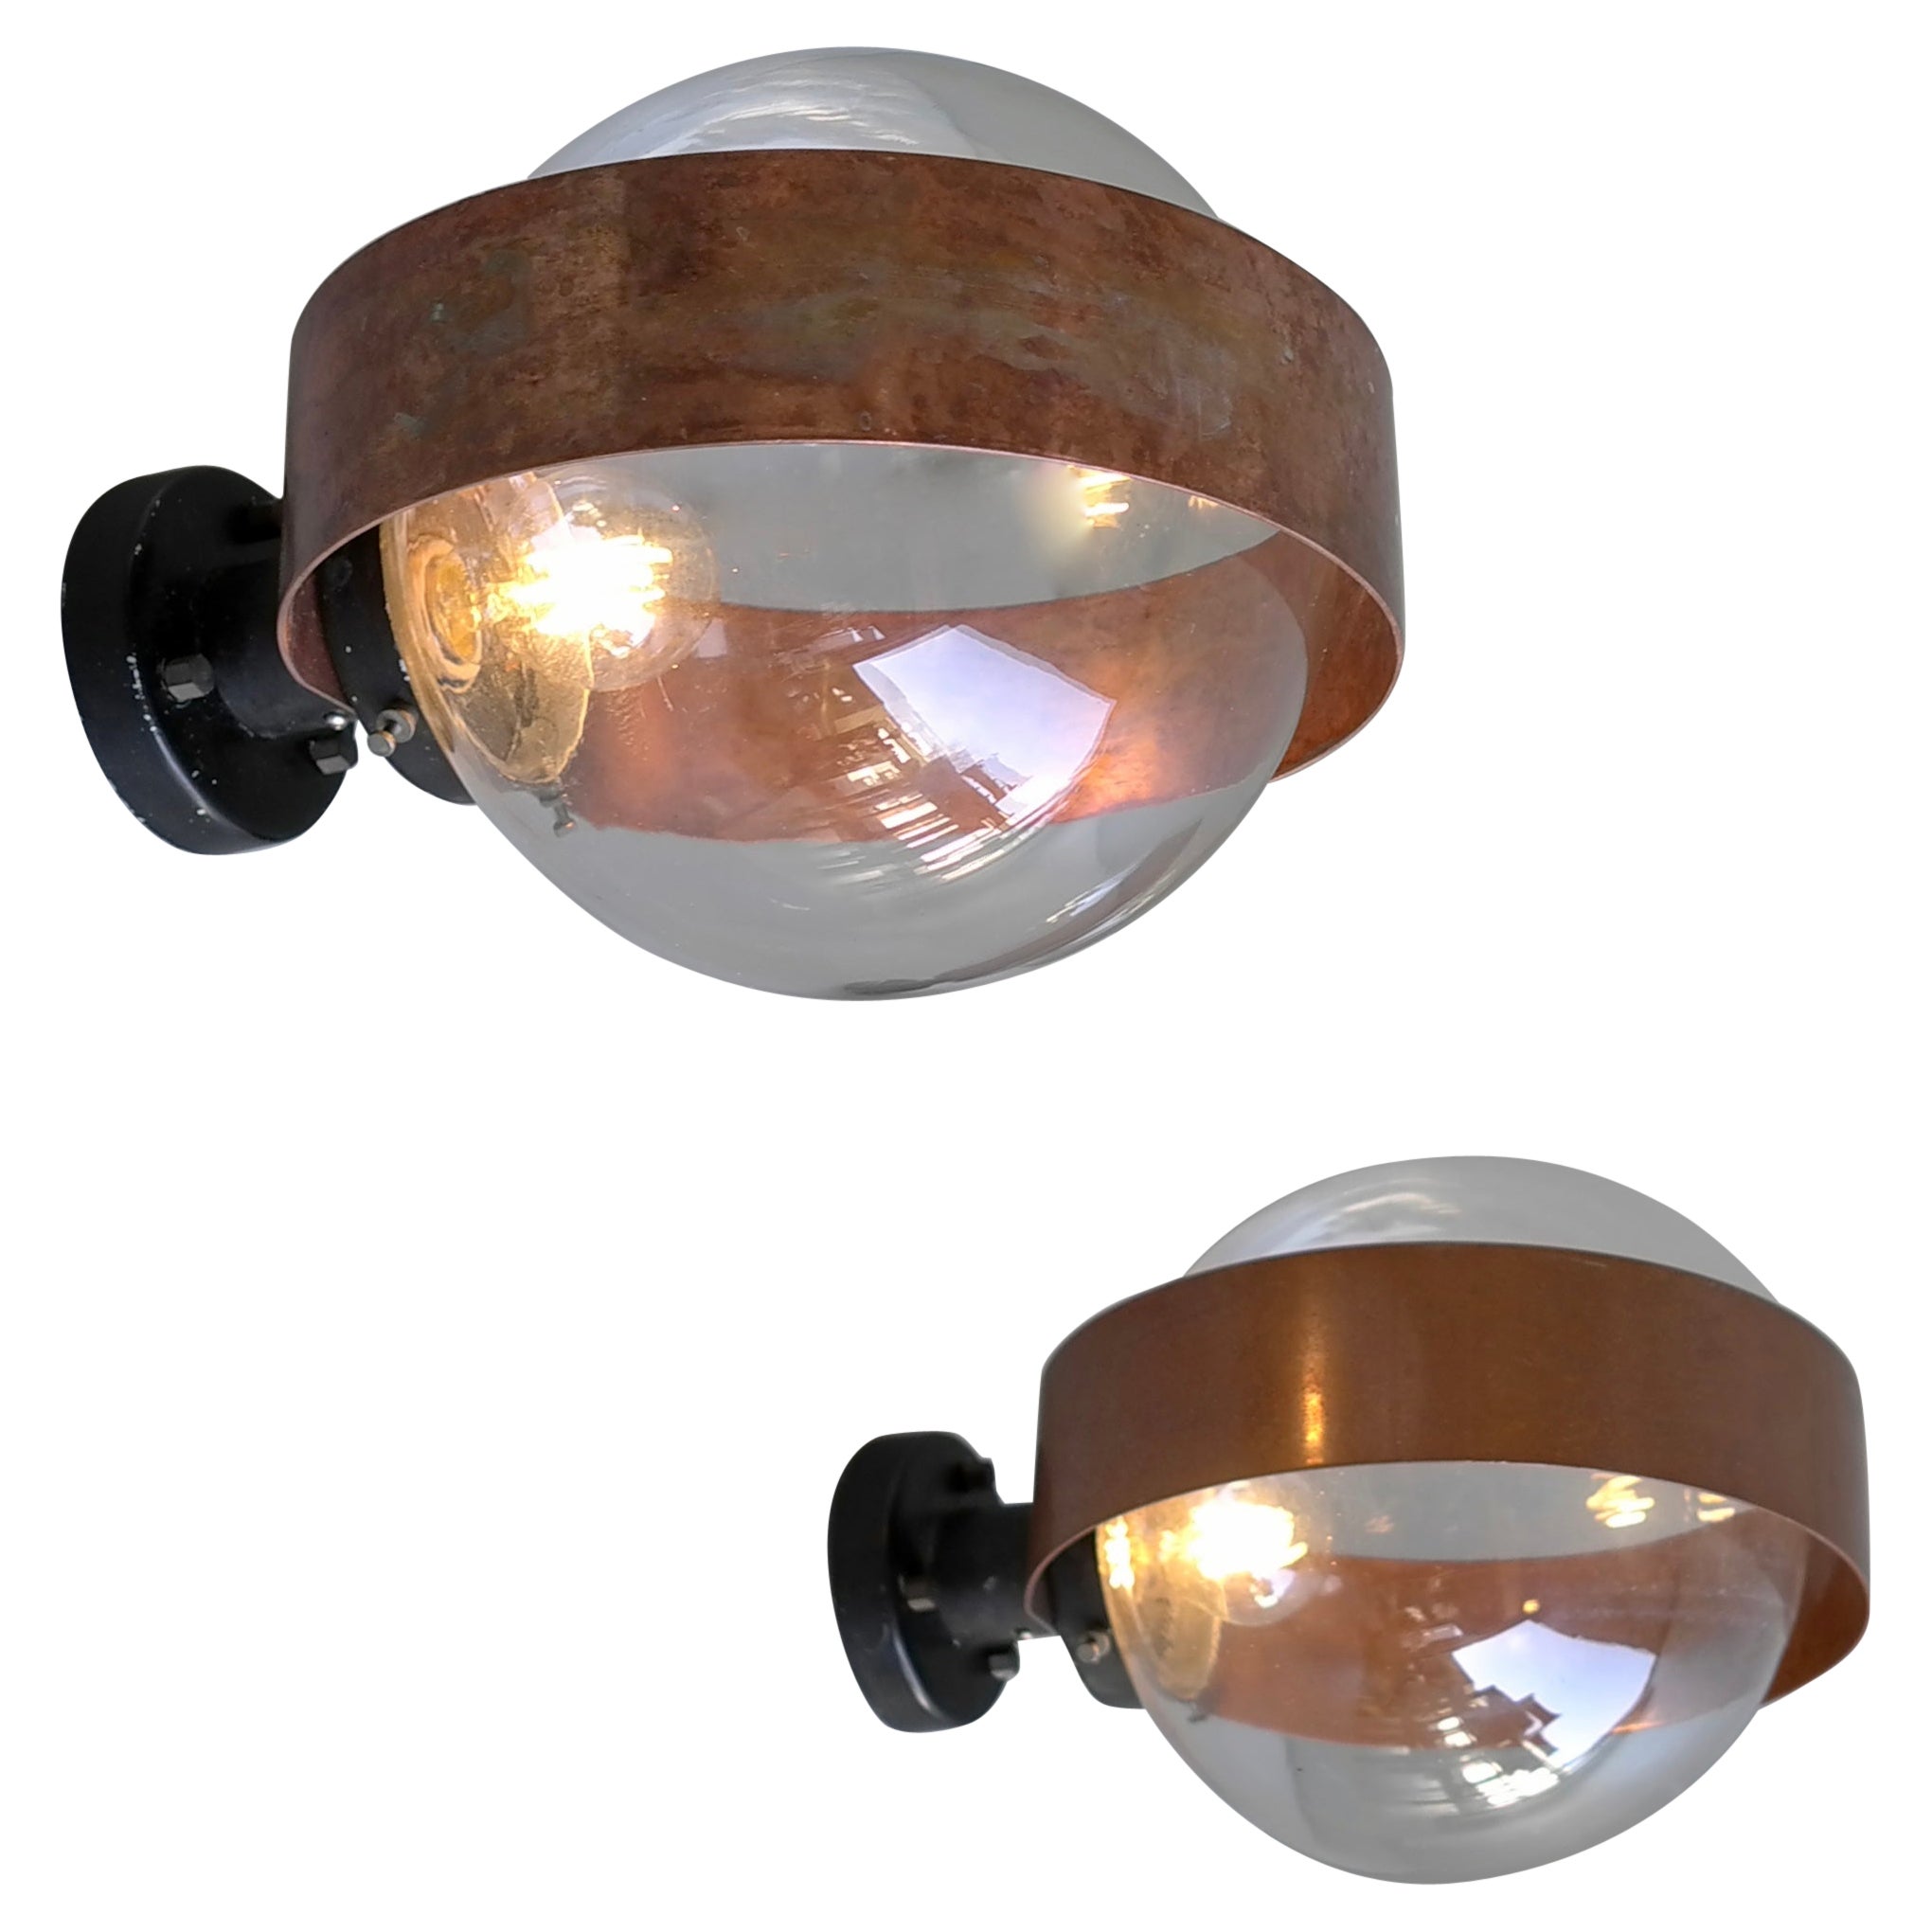 Pair of Scandinavian Glass Ball Wall lamps with Copper Patina Rims, 1960's